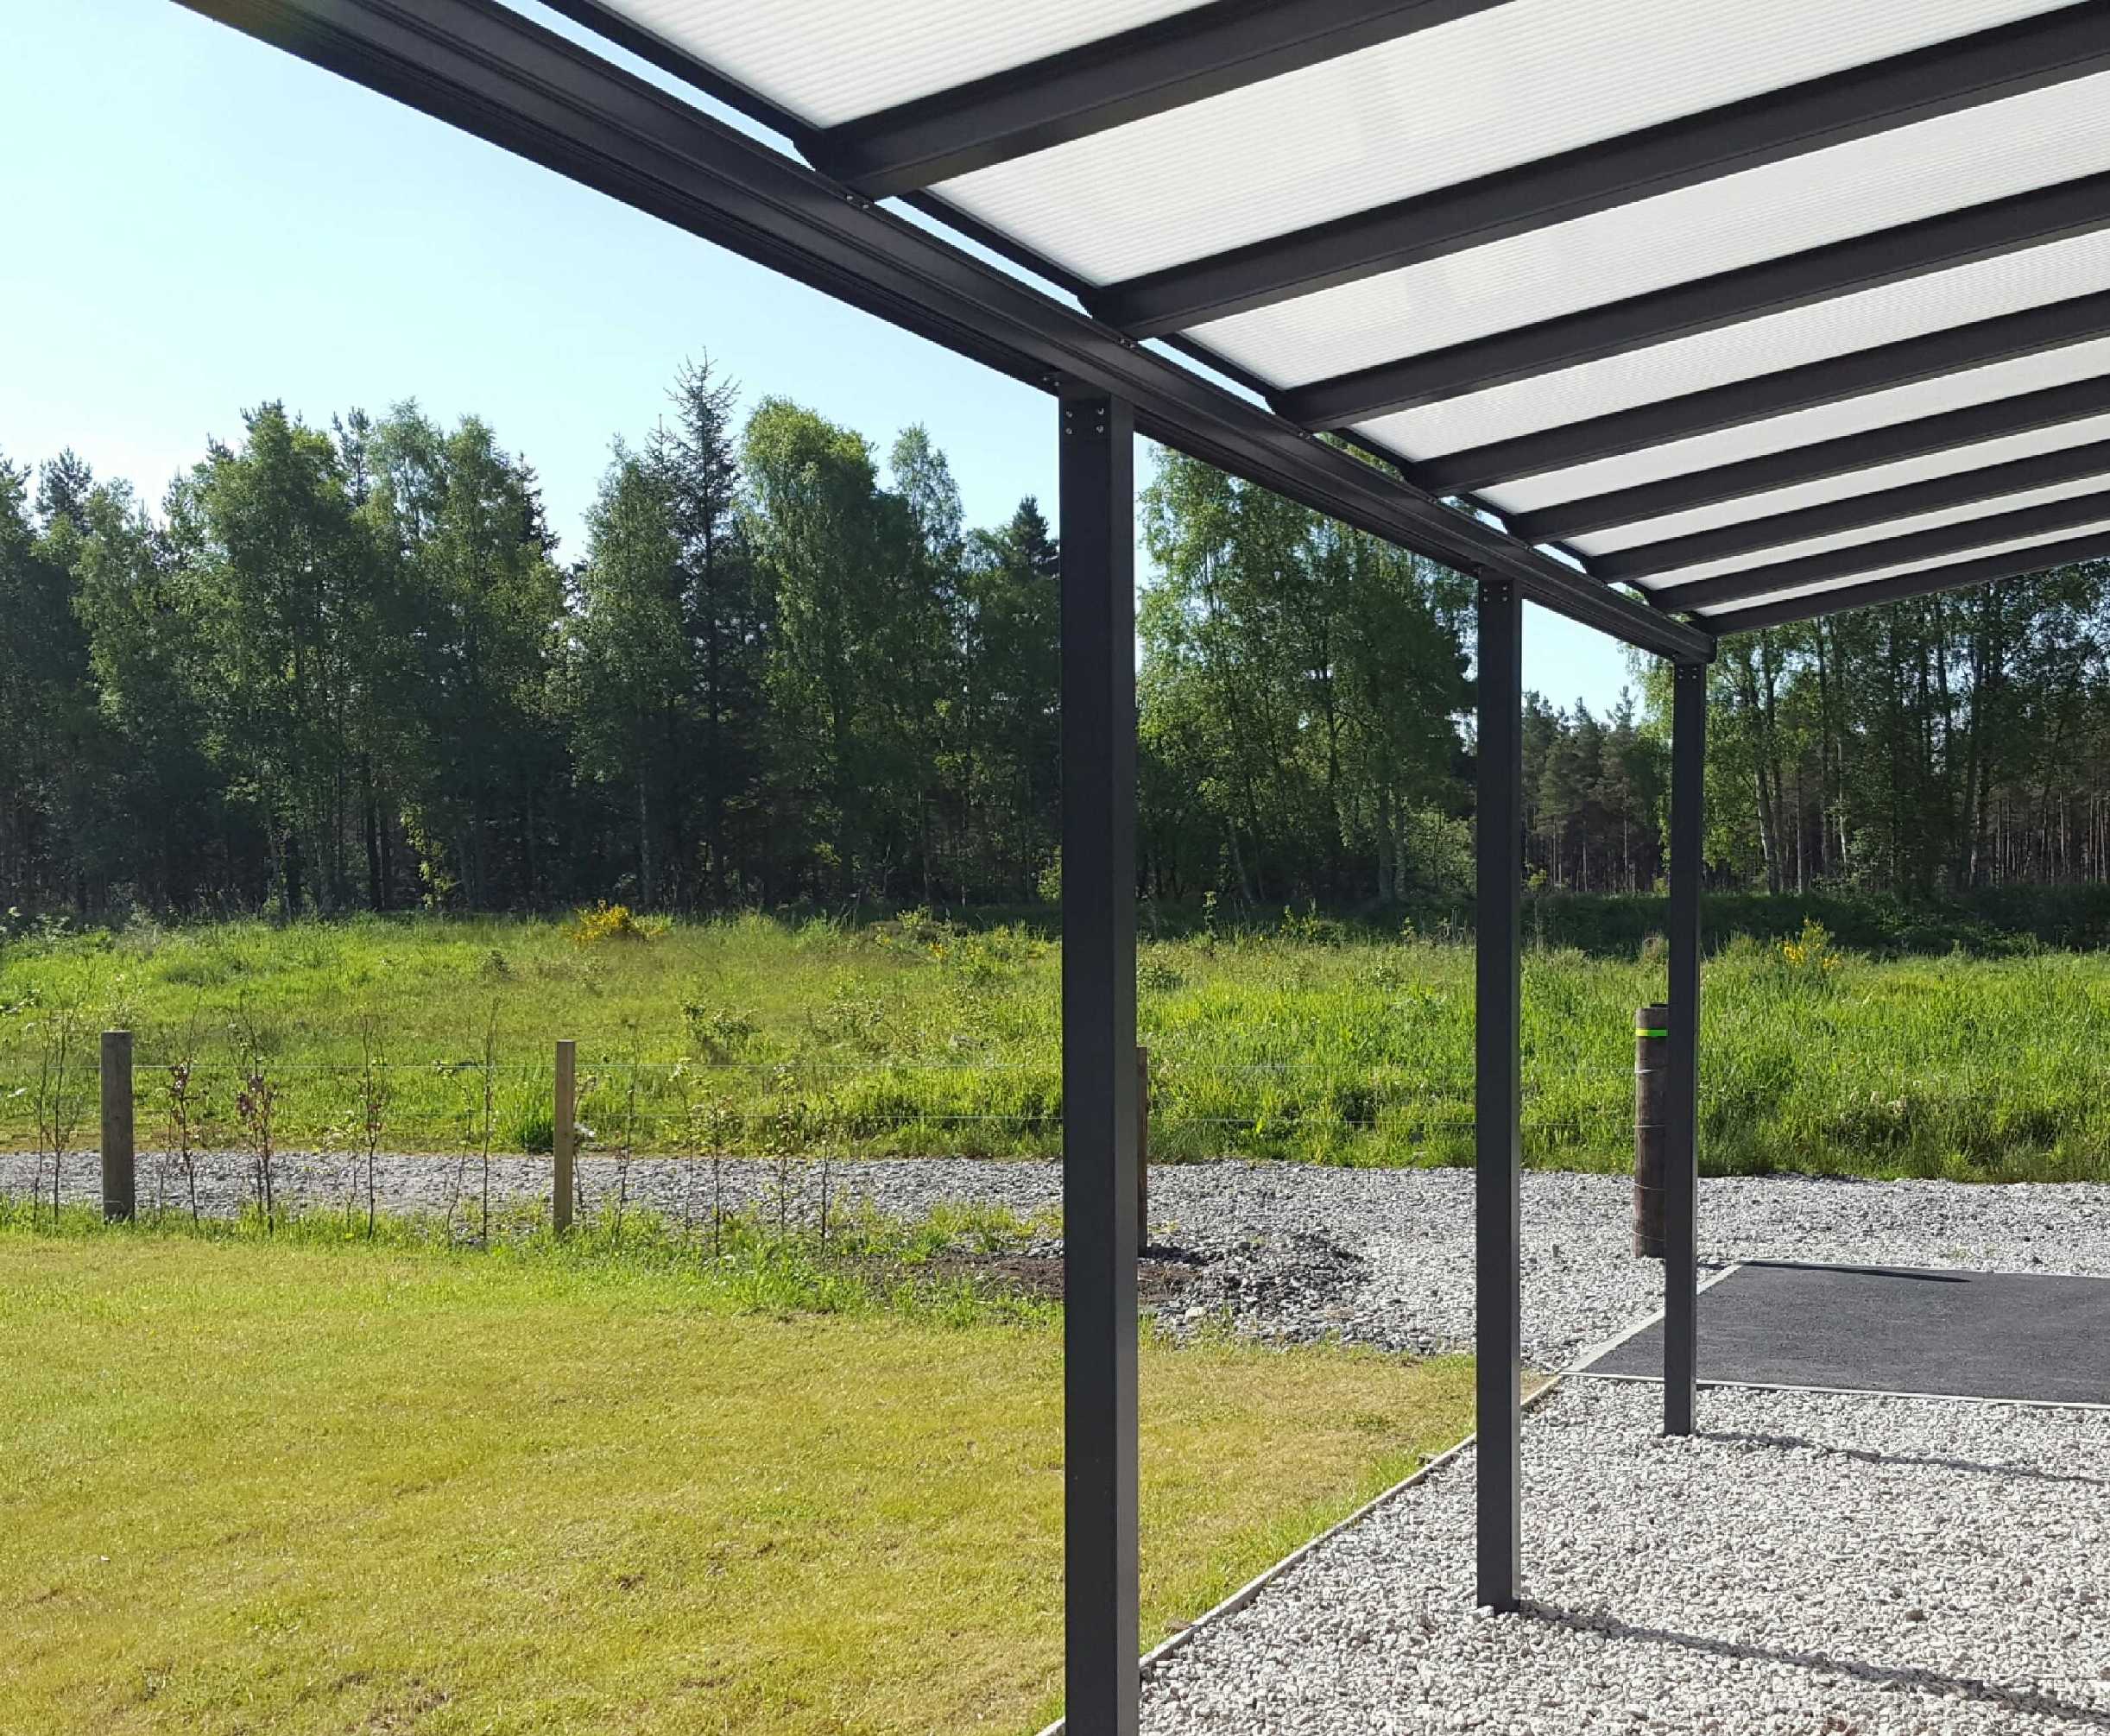 Omega Smart Lean-To Canopy, Anthracite Grey, 6mm Glass Clear Plate Polycarbonate Glazing - 3.5m (W) x 3.5m (P), (3) Supporting Posts